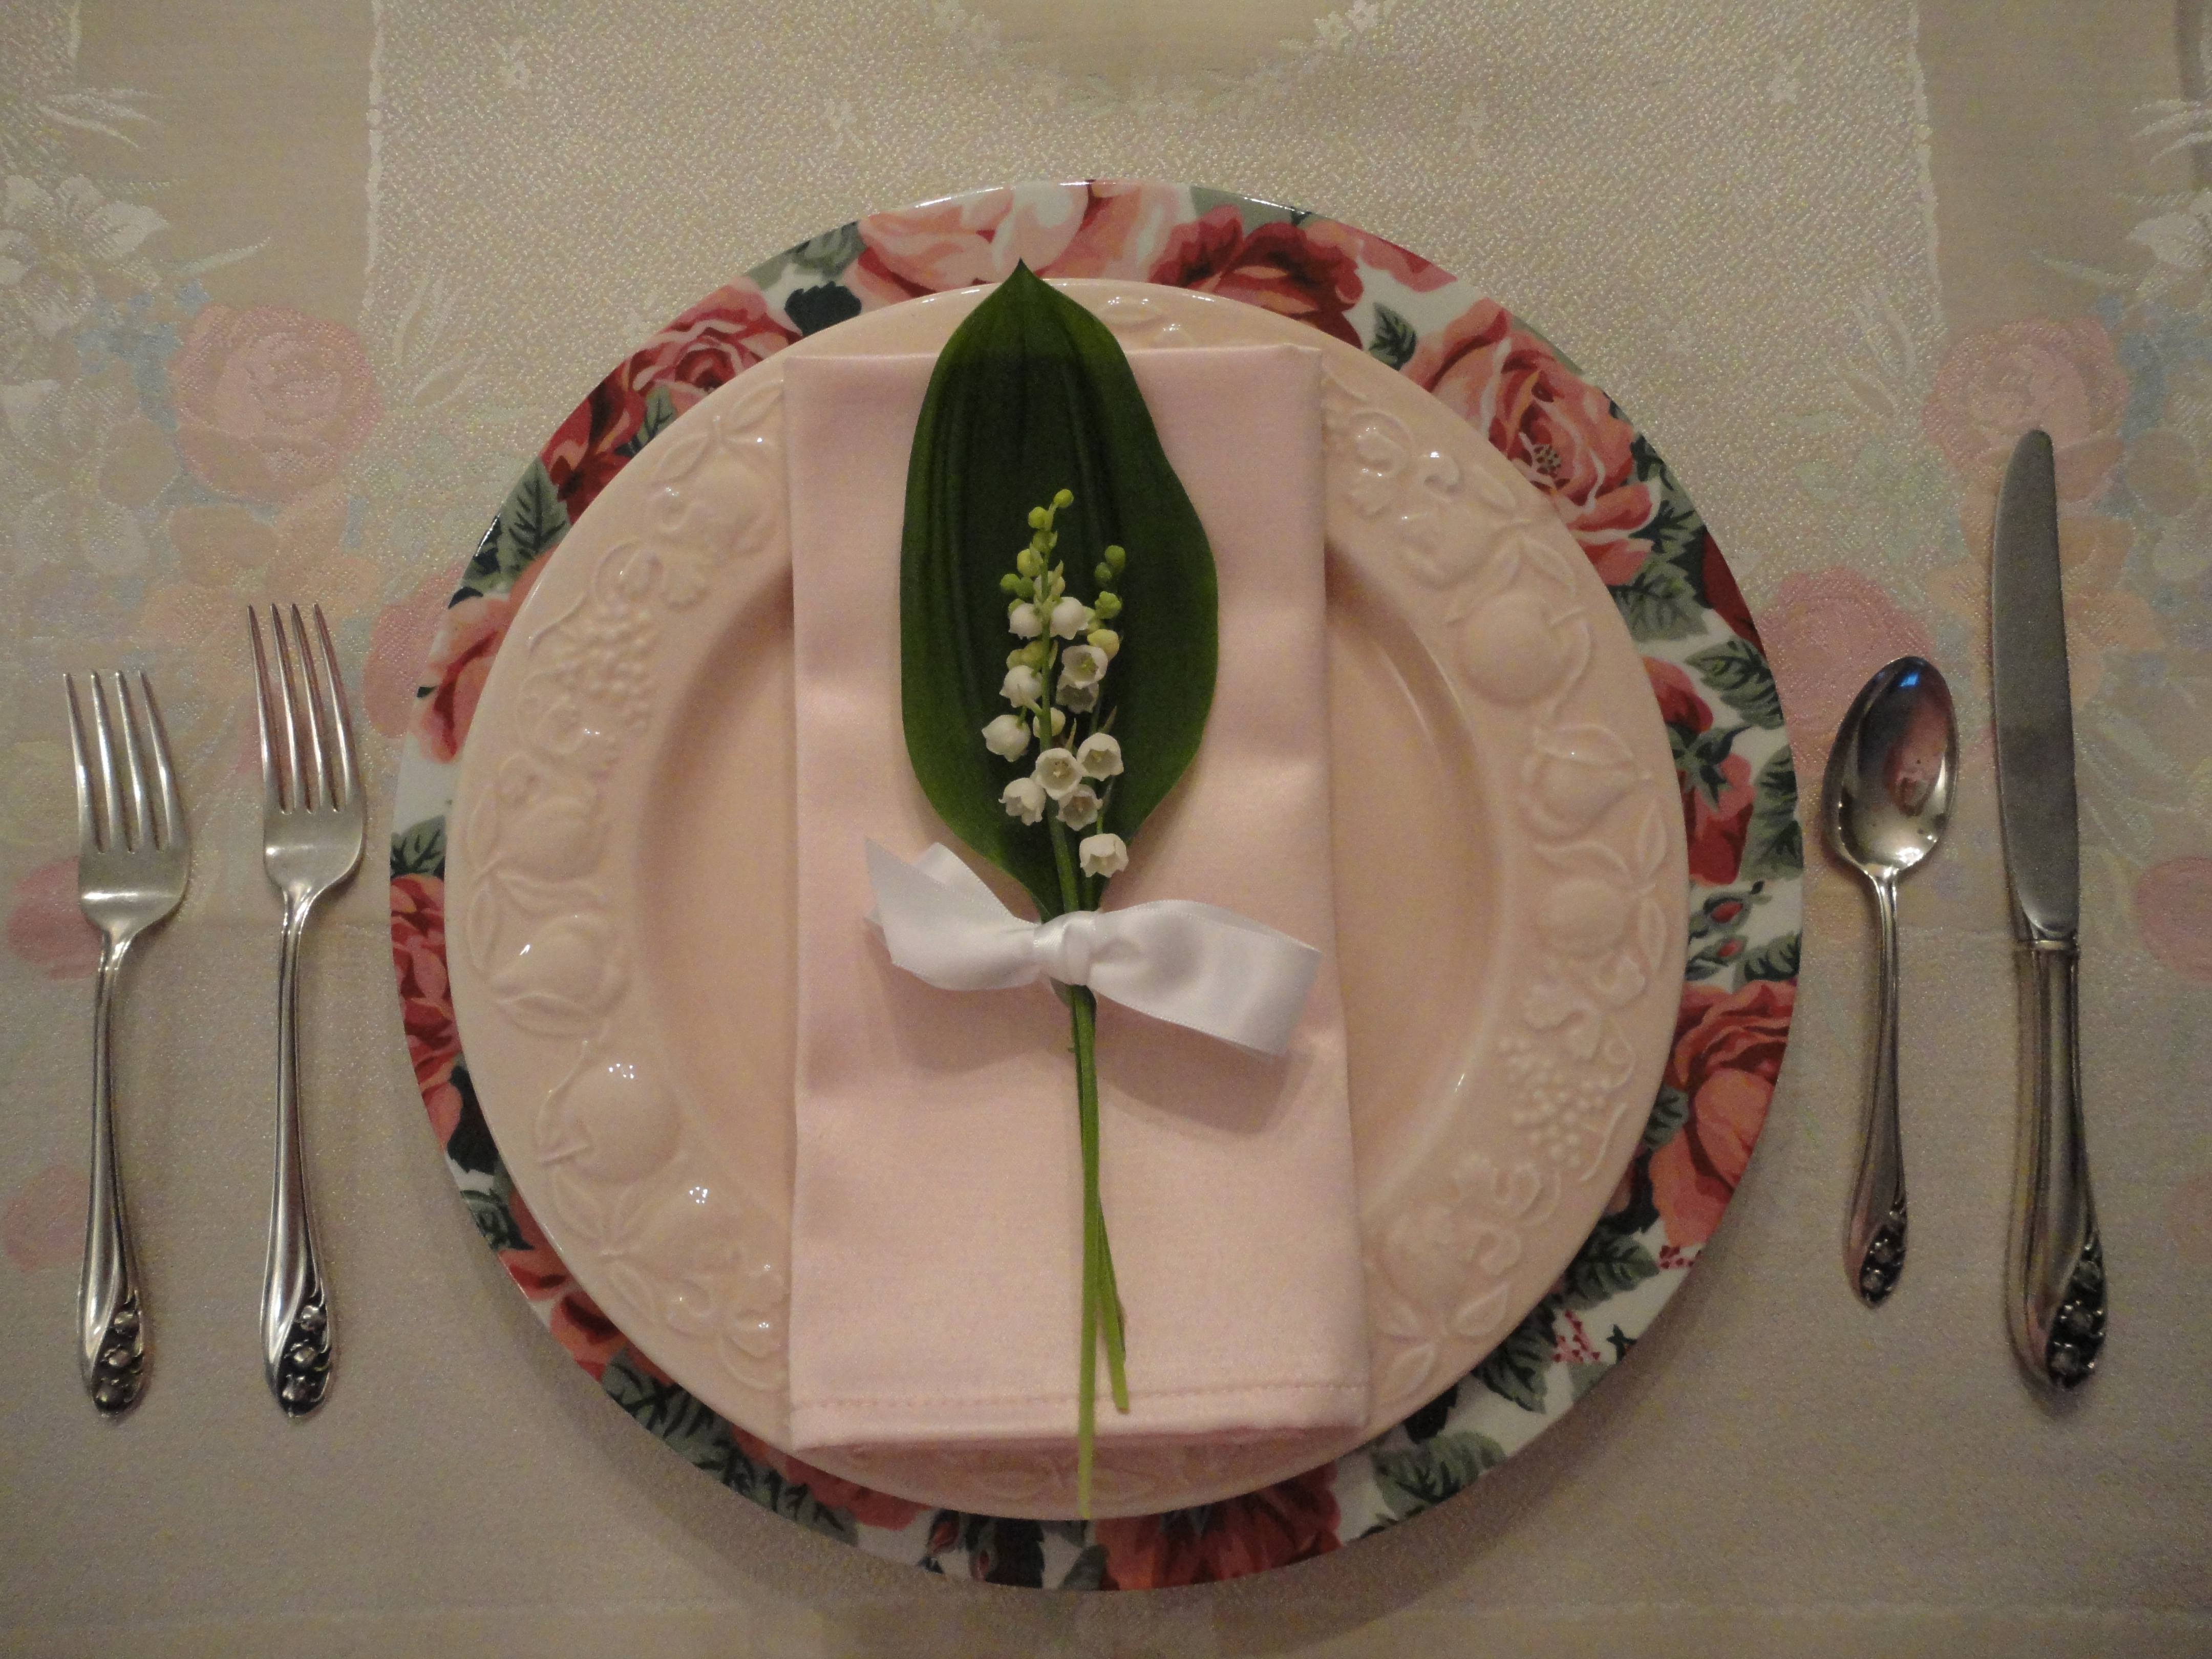 Favorite Things – Pretty place settings and dishes I like.